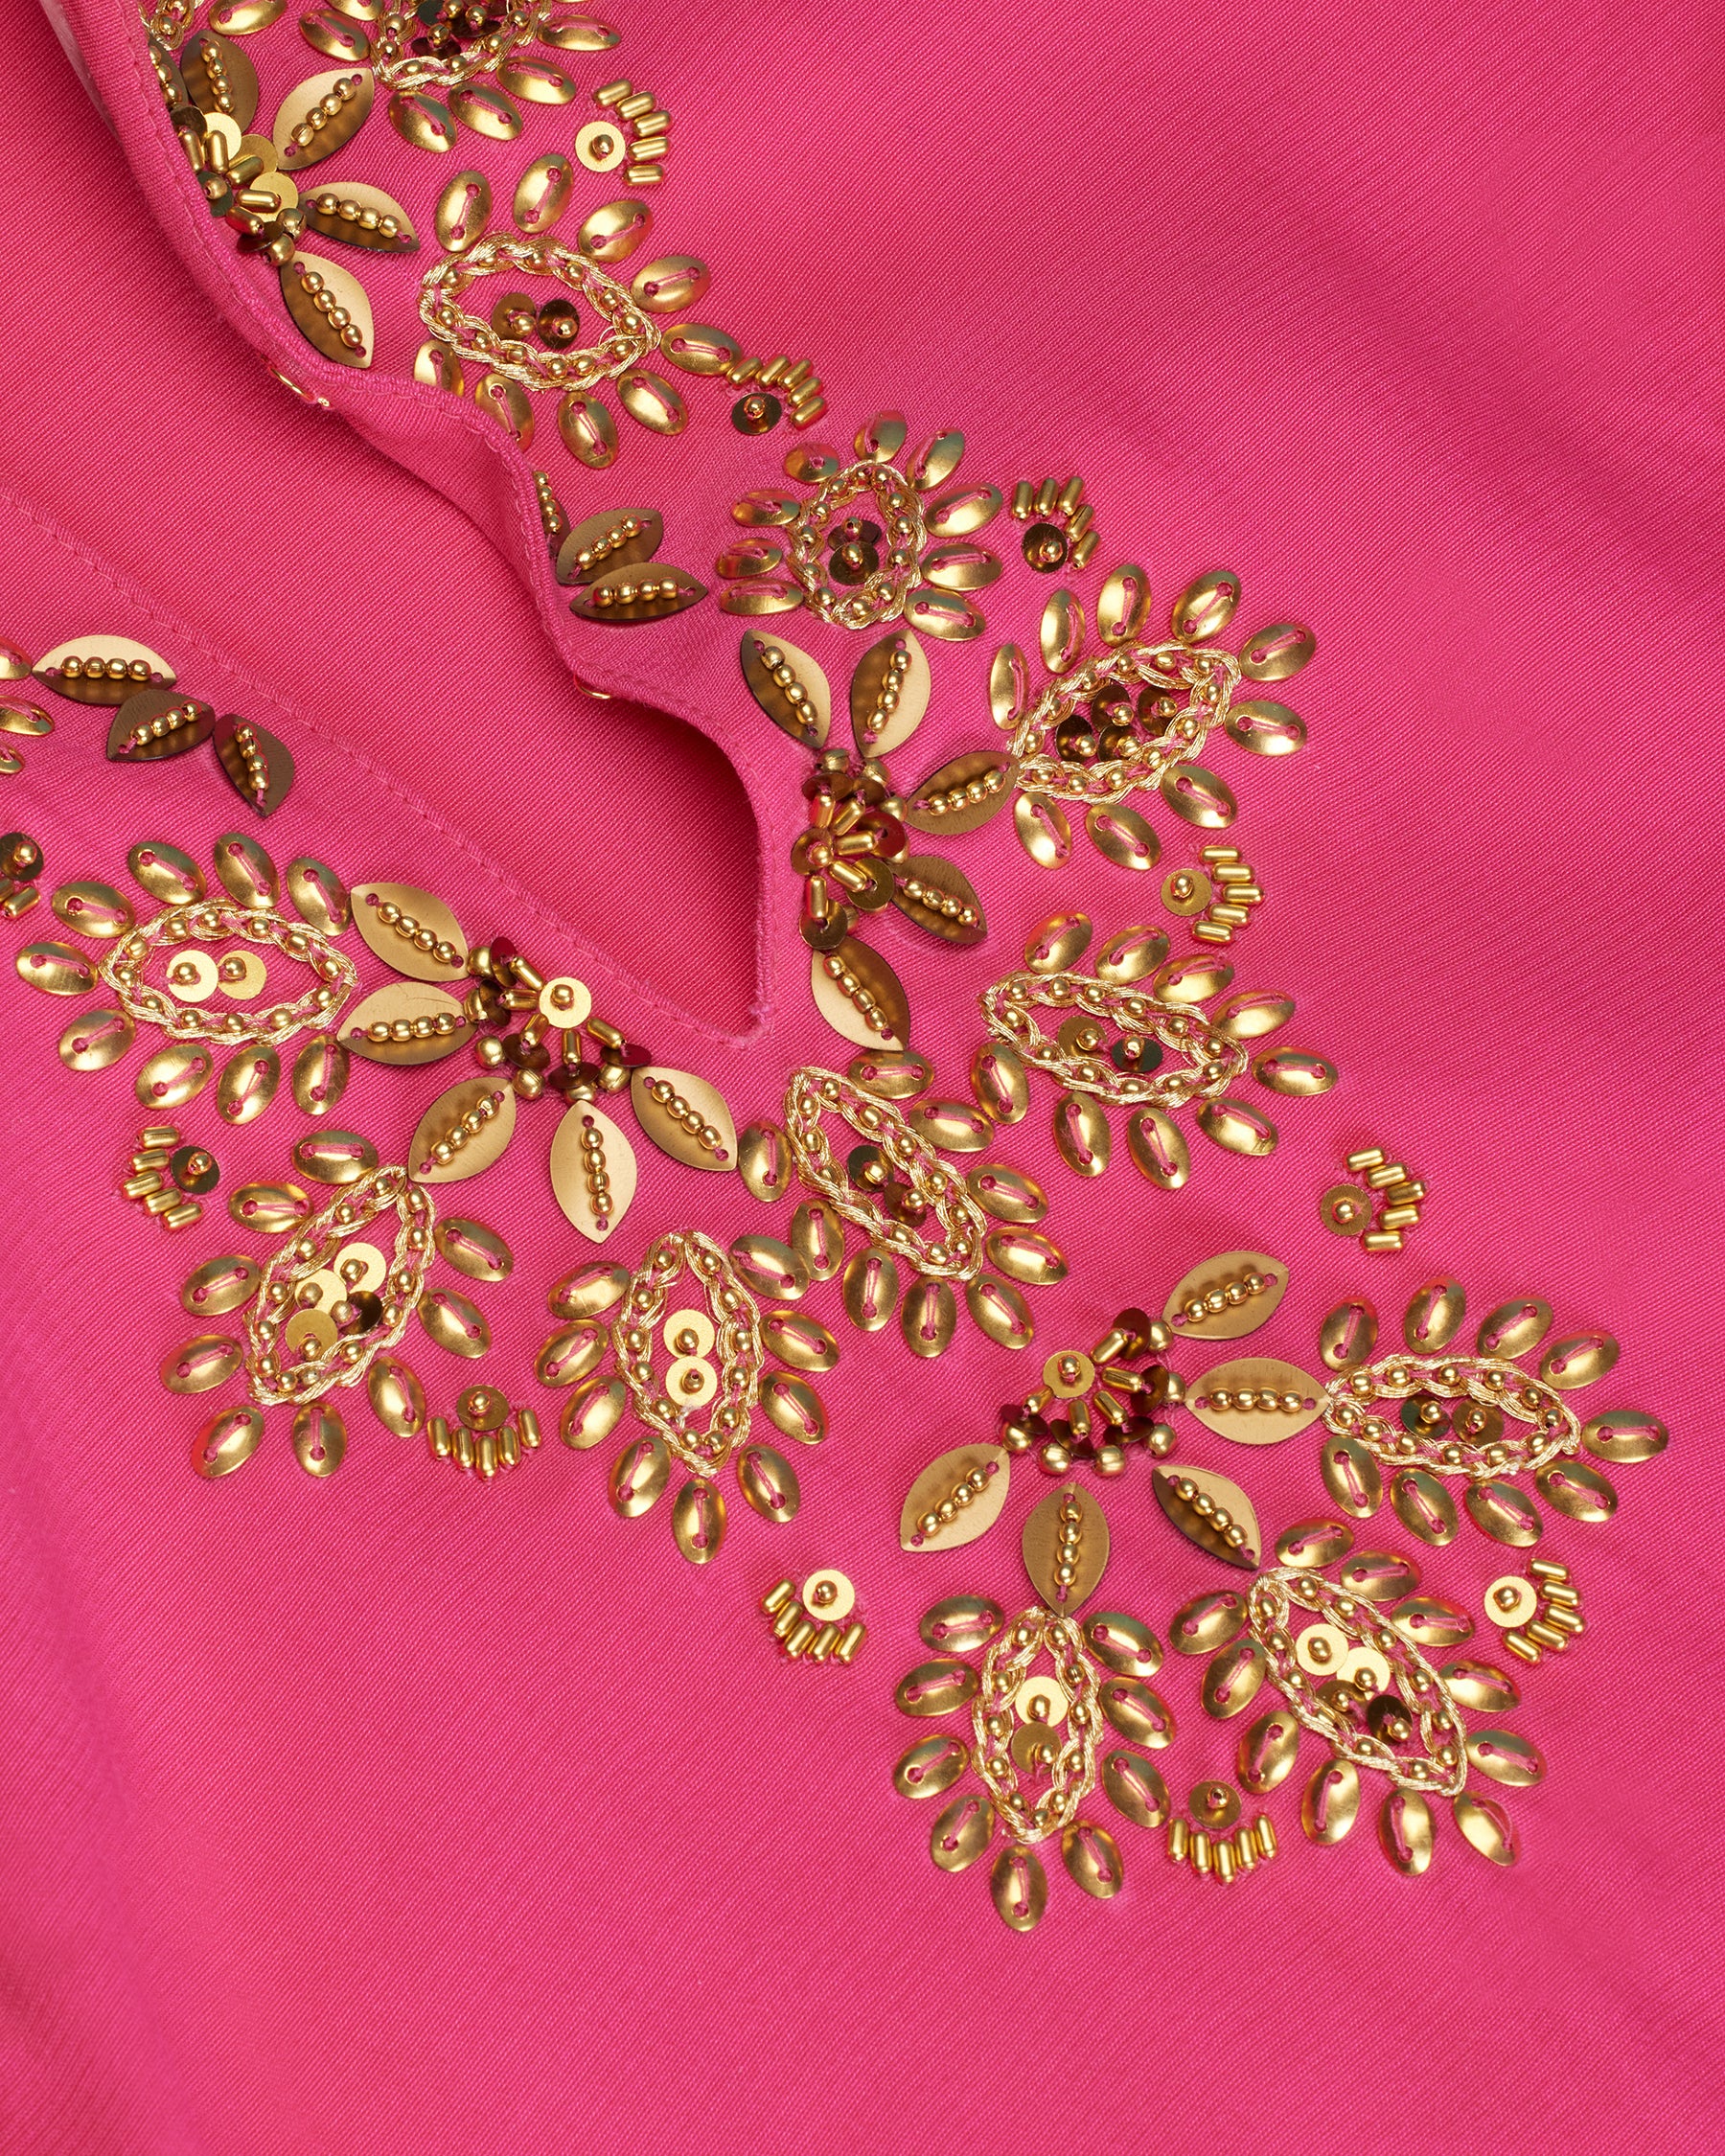 Callista Tunic in Hot Pink and Gold Embellishment-Detail of Hand Embesllishment